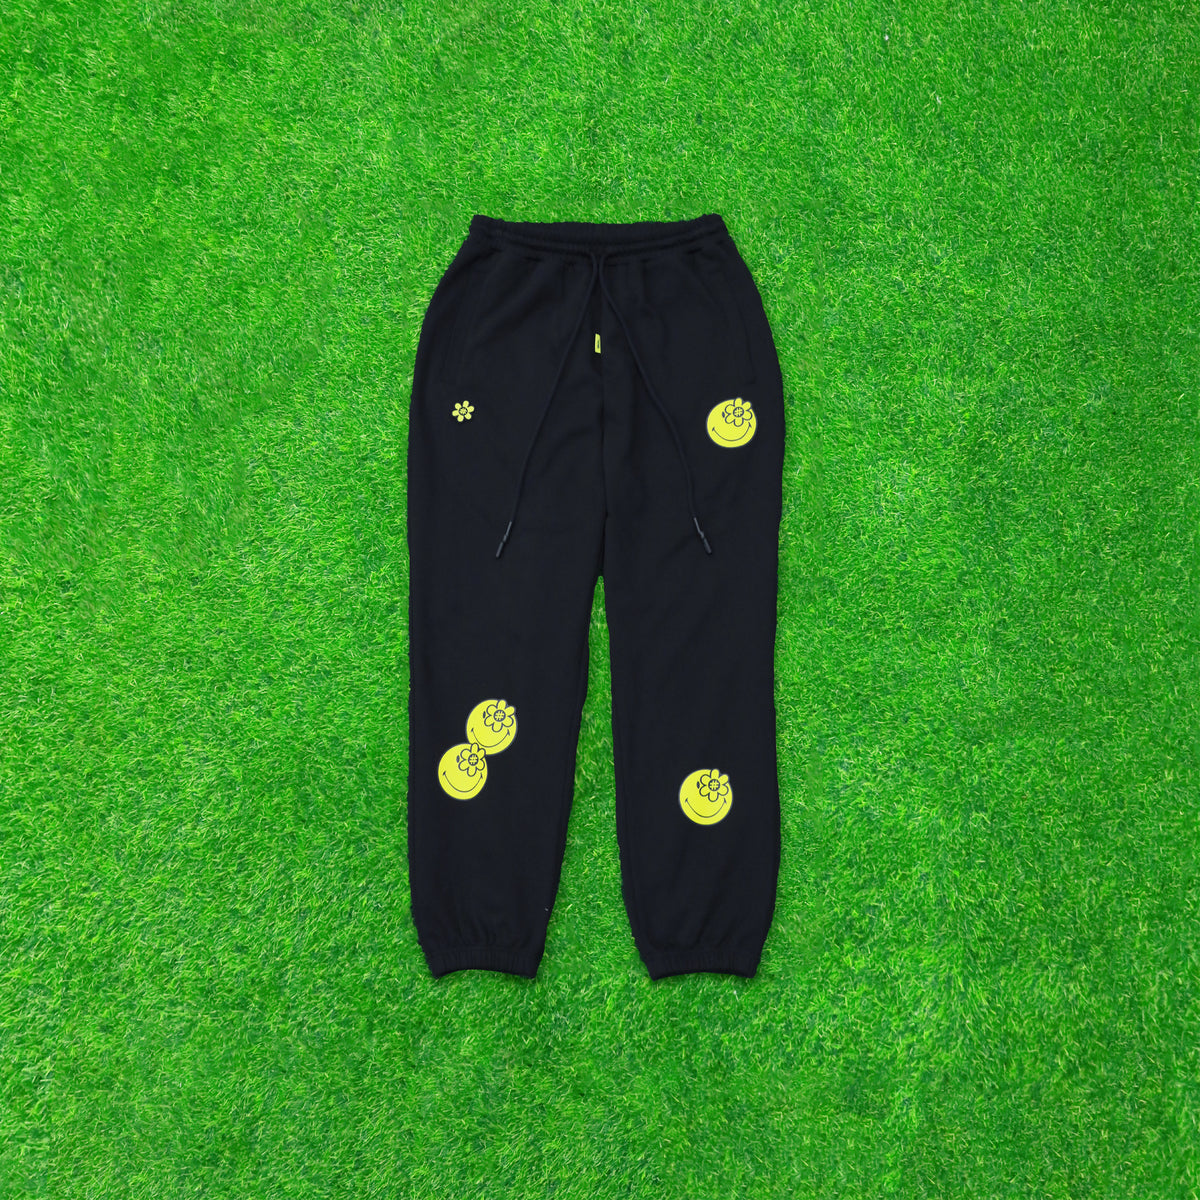 HIDENSEEK PANTS | BLACK, Elasticated and Drawstring Waist, 2 Side Pockets, Woven Brand Patch, Collaboration with Smiley, Color: Black, Material: 100% Cotton